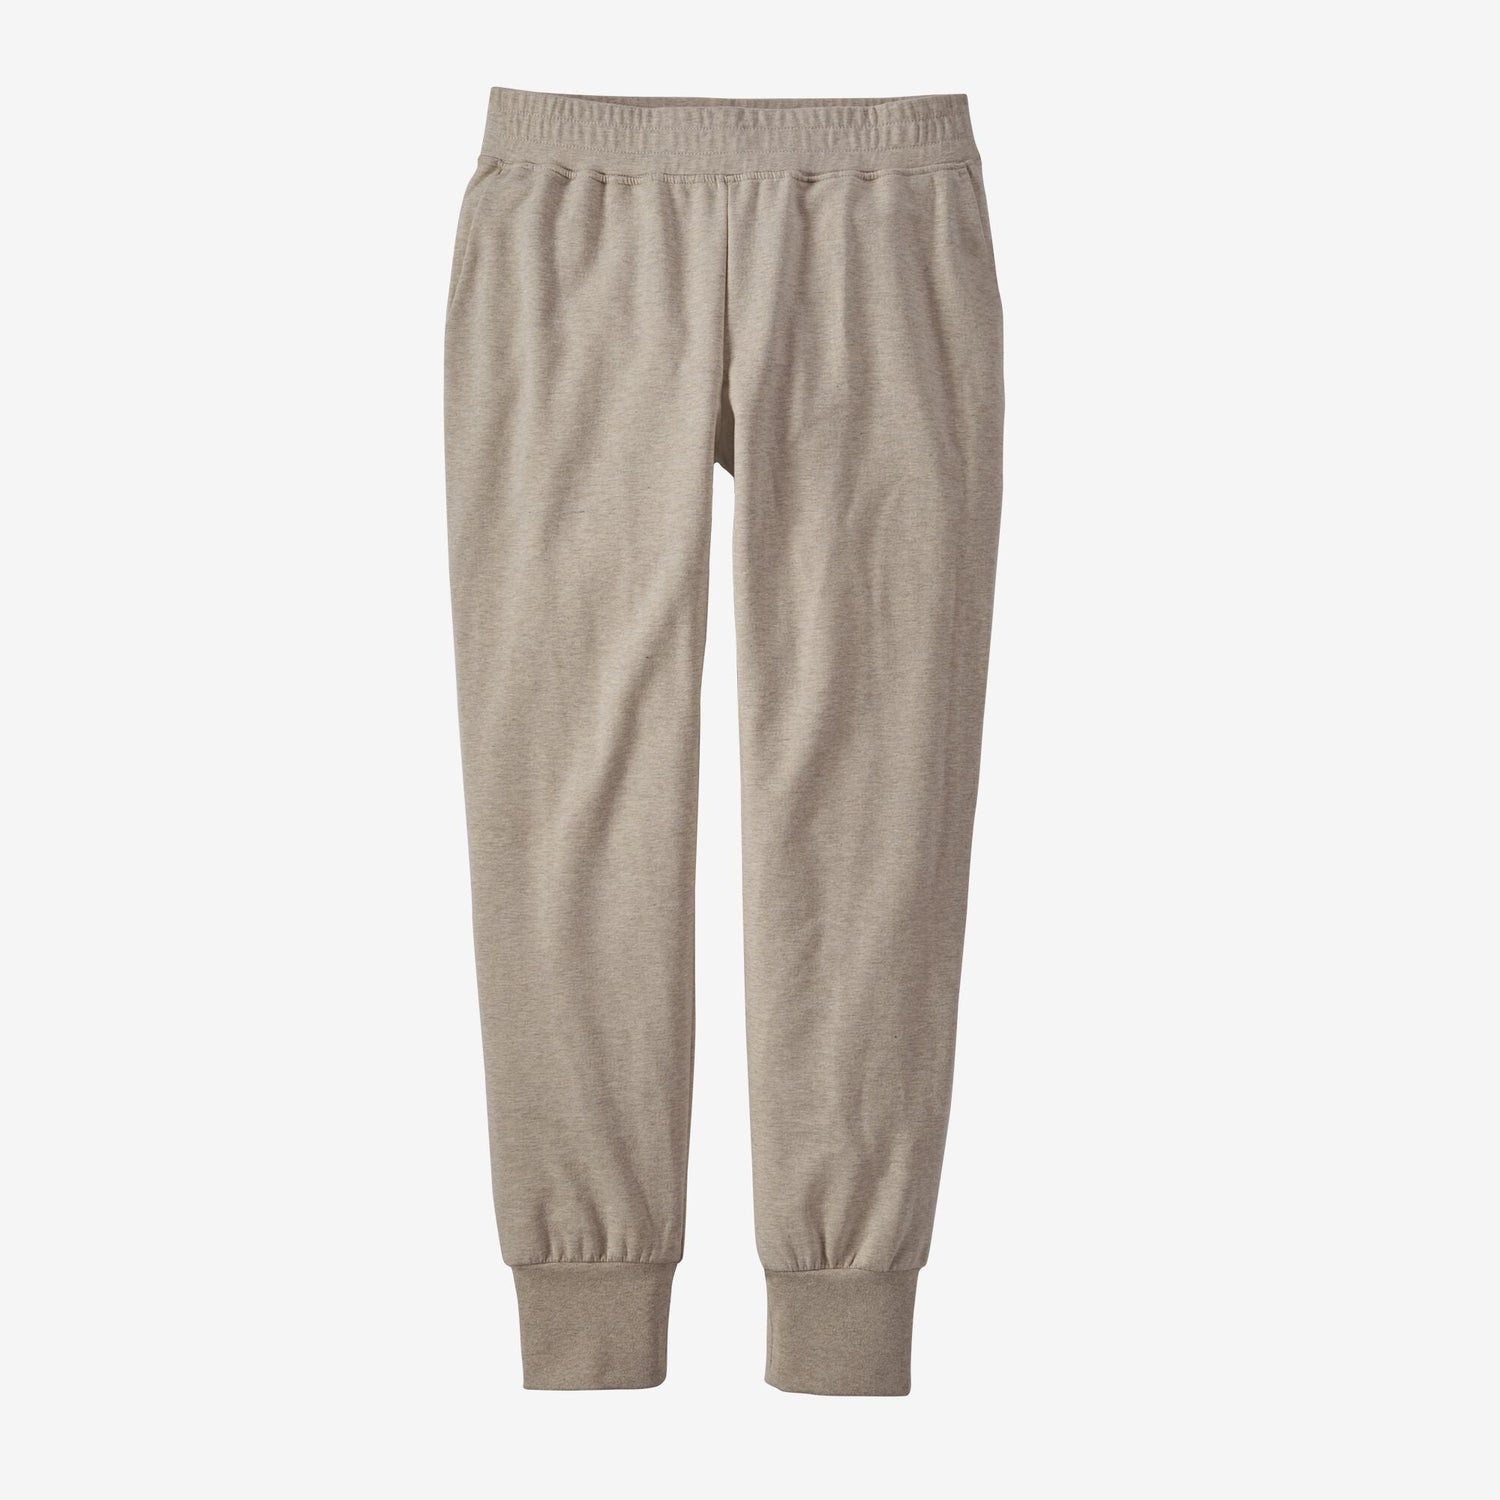 Patagonia - W's Ahnya Pants - Organic Cotton & Recycled Polyester - Weekendbee - sustainable sportswear